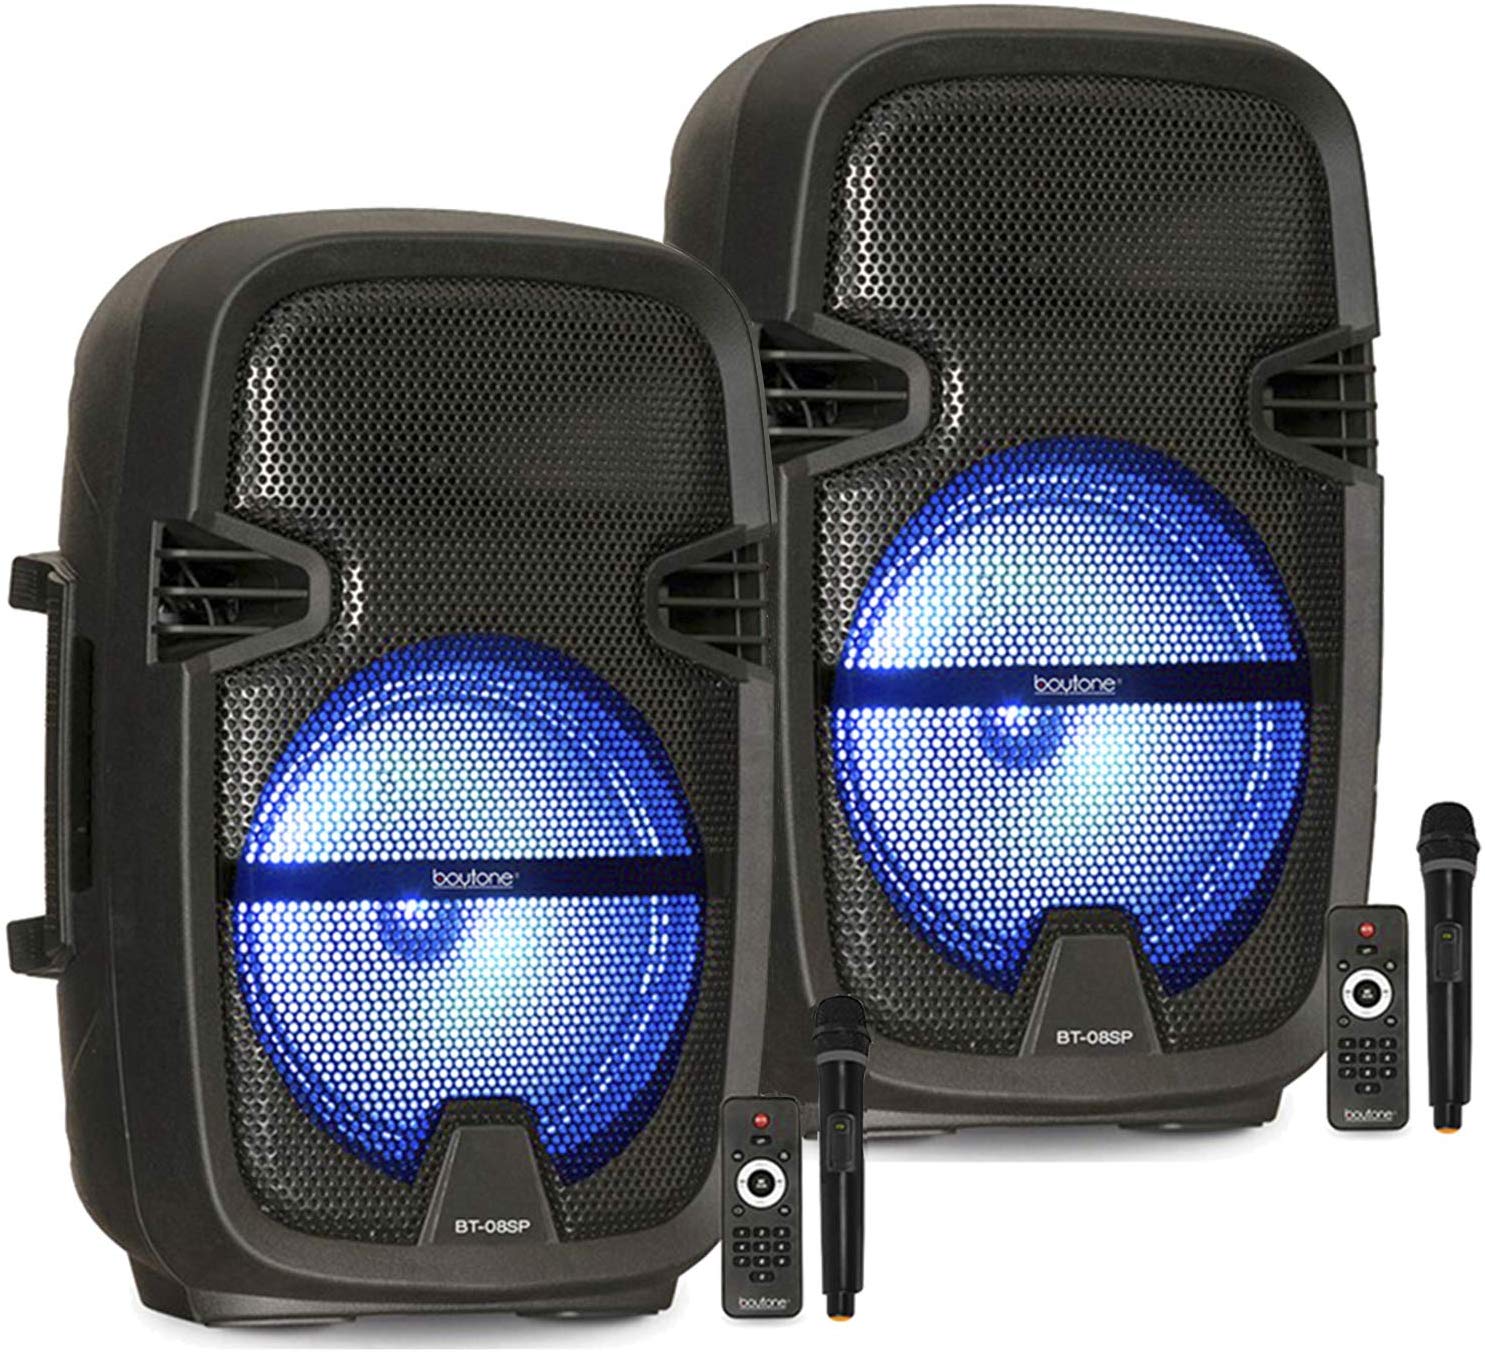 Pair of BT-08SP2 Boytone 8” Portable Bluetooth PA Speaker, Rechargeable, Karaoke, Wireless Microphone, TWS(Wireless) to Connect both Speakers Together. DJ Lights, FM, MP3, USB Port, TF Slot, AUX - image 1 of 7